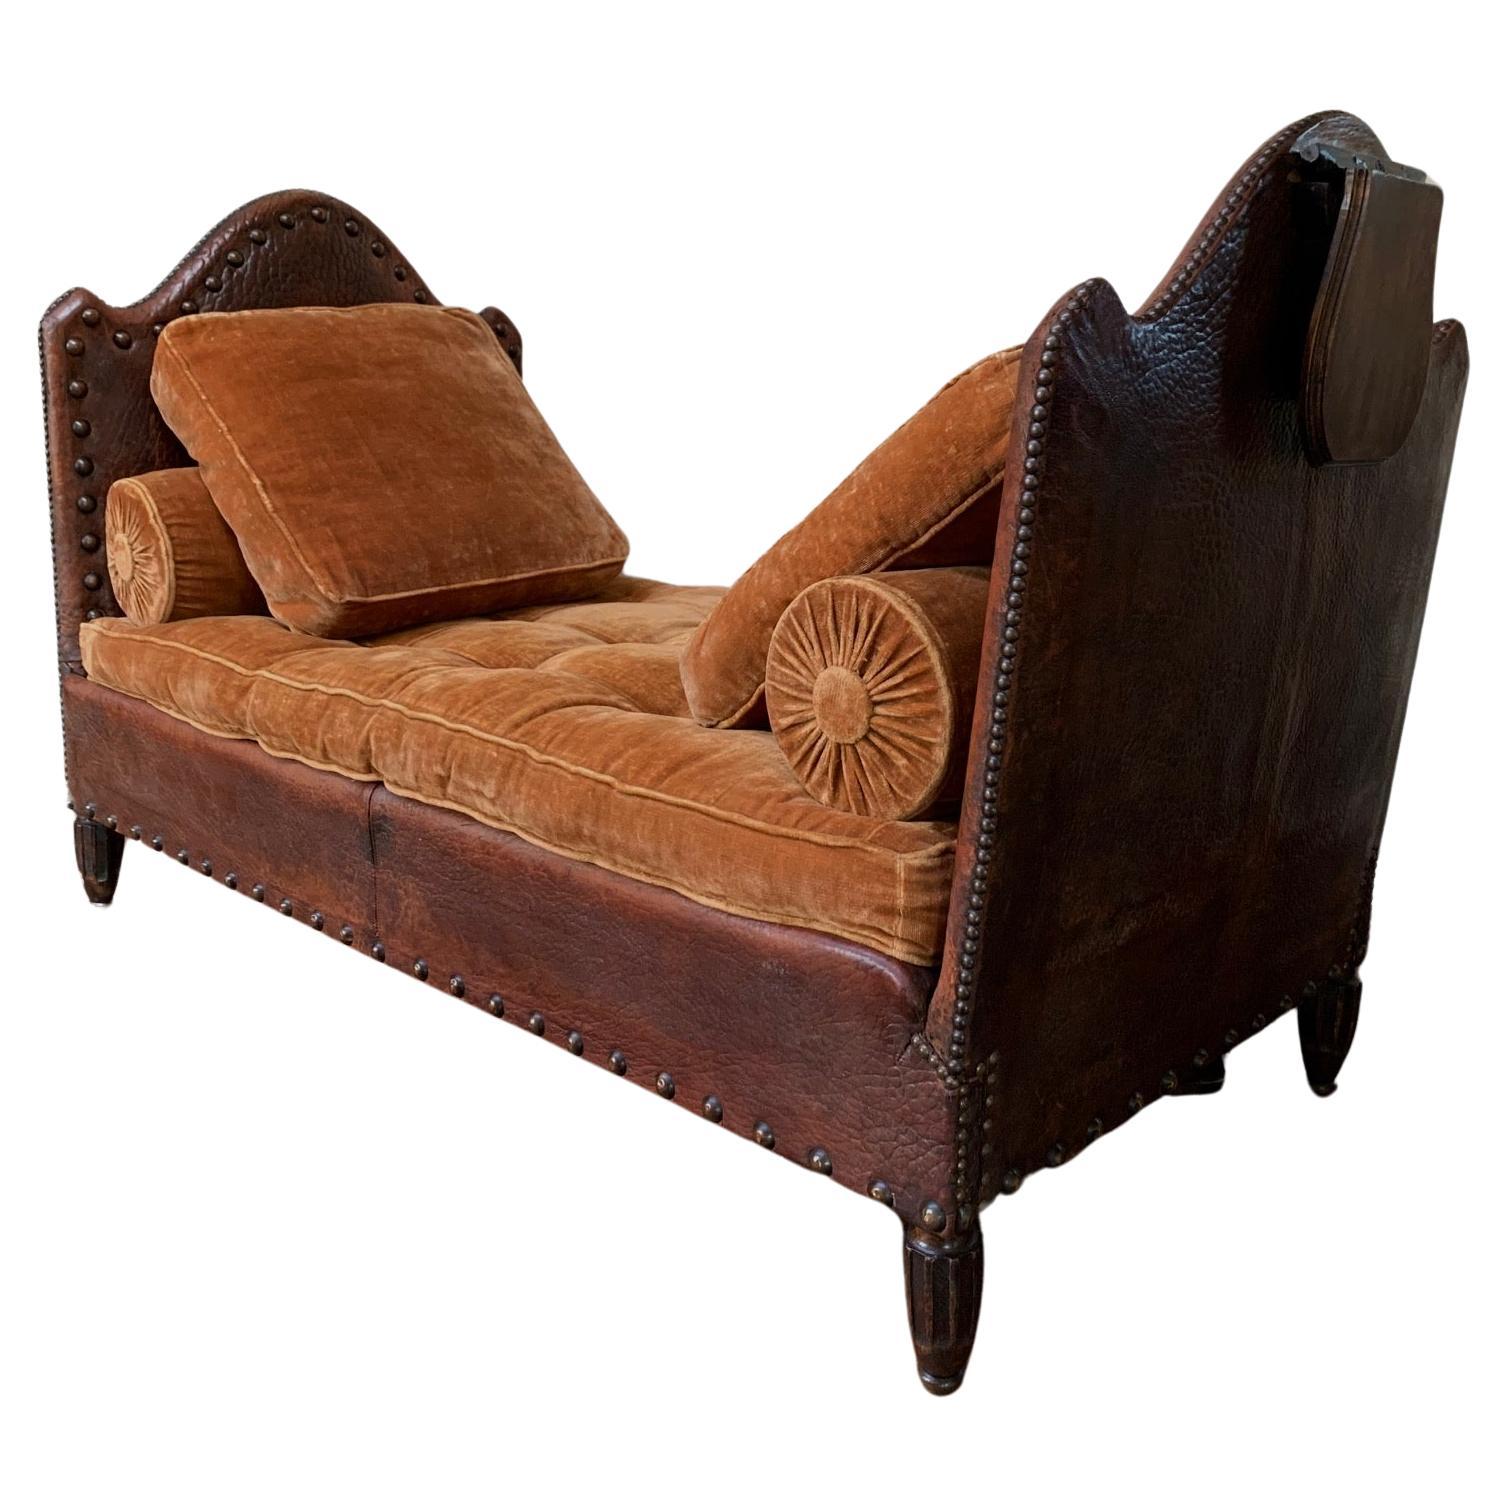 An Exquisite and Rare French Leather Daybed Completely Original, Circa 1920's For Sale